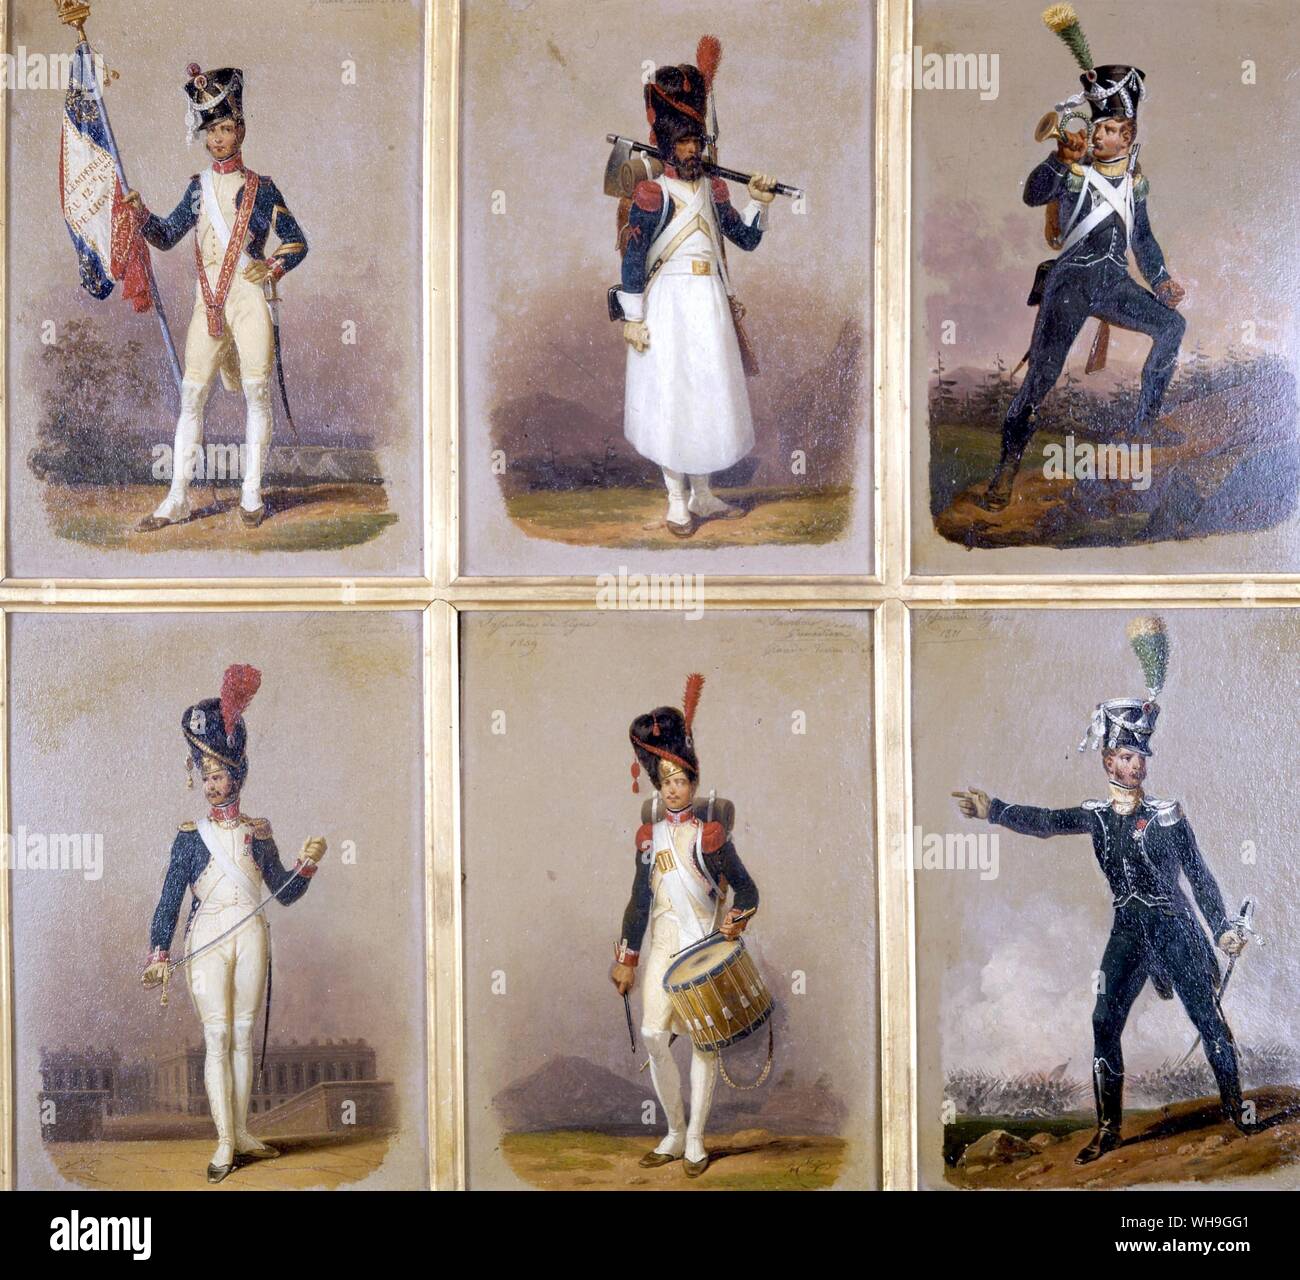 Collection of typres of Napoleonic Uniforms. Infantry of the line Sergeant Major Ensign Bearer 1809. Infantry of the line Captain of Grenadiers 1809. Infantry of the lie Sapper 1908. Infantry of the line Drummer 1809. Light Infantry Ensign 1811. Light infantry Captain 1811 Stock Photo